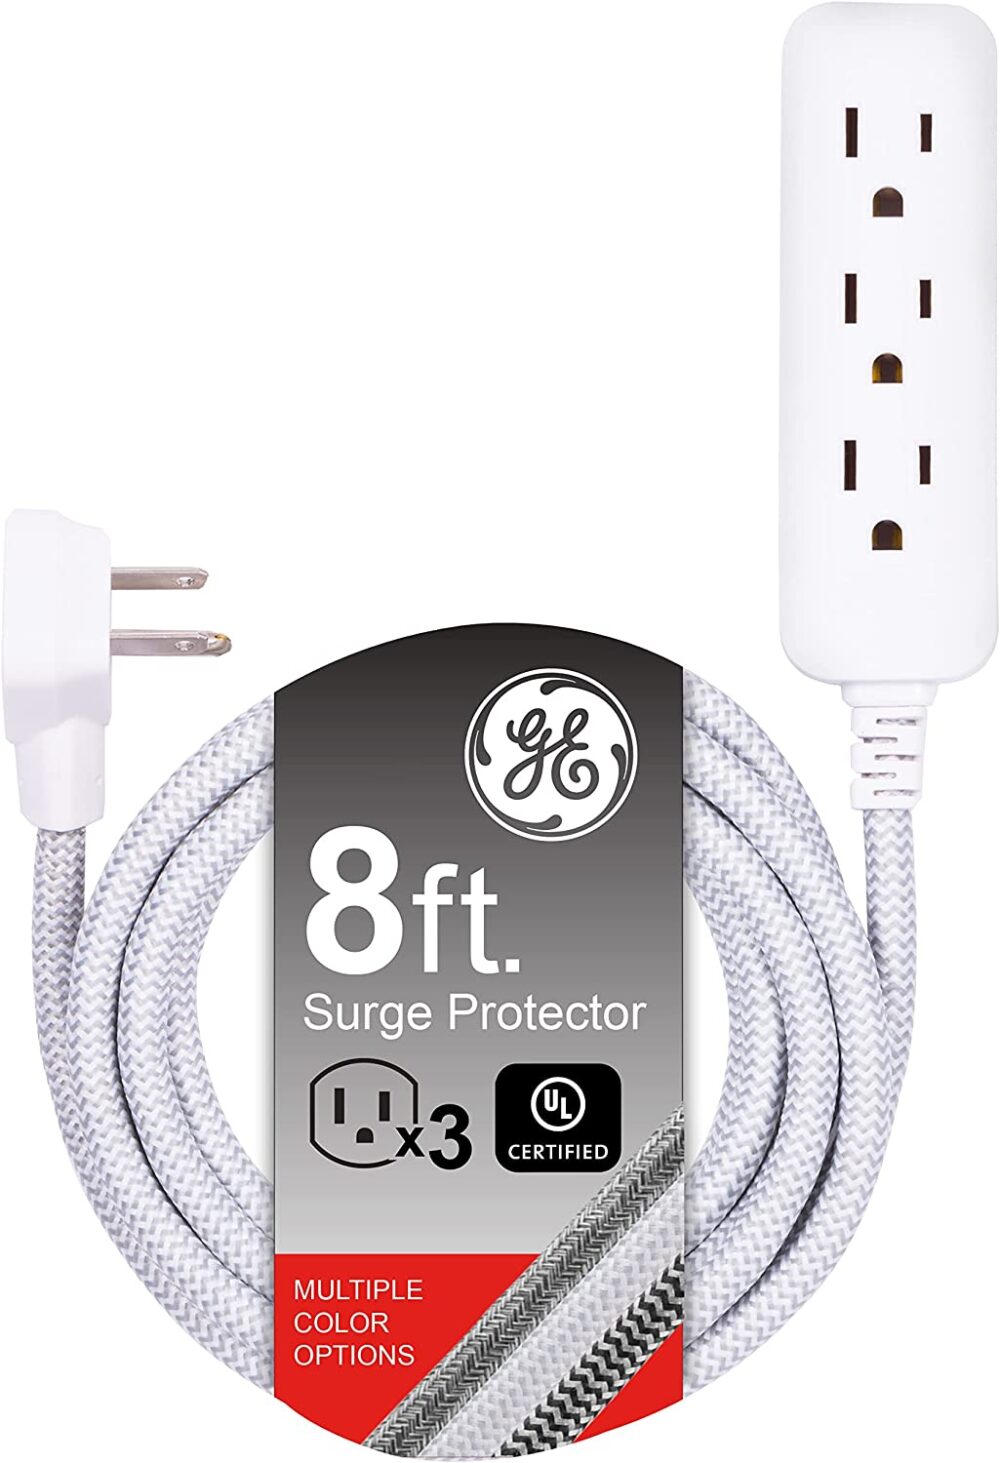 GE Pro 3-Outlet Power Strip with Surge Protection, 8 Ft Designer Braided Extension Cord, Grounded, Flat Plug, 250 Joules, Warranty, UL Listed, Gray-White, 38433-one-buy-club